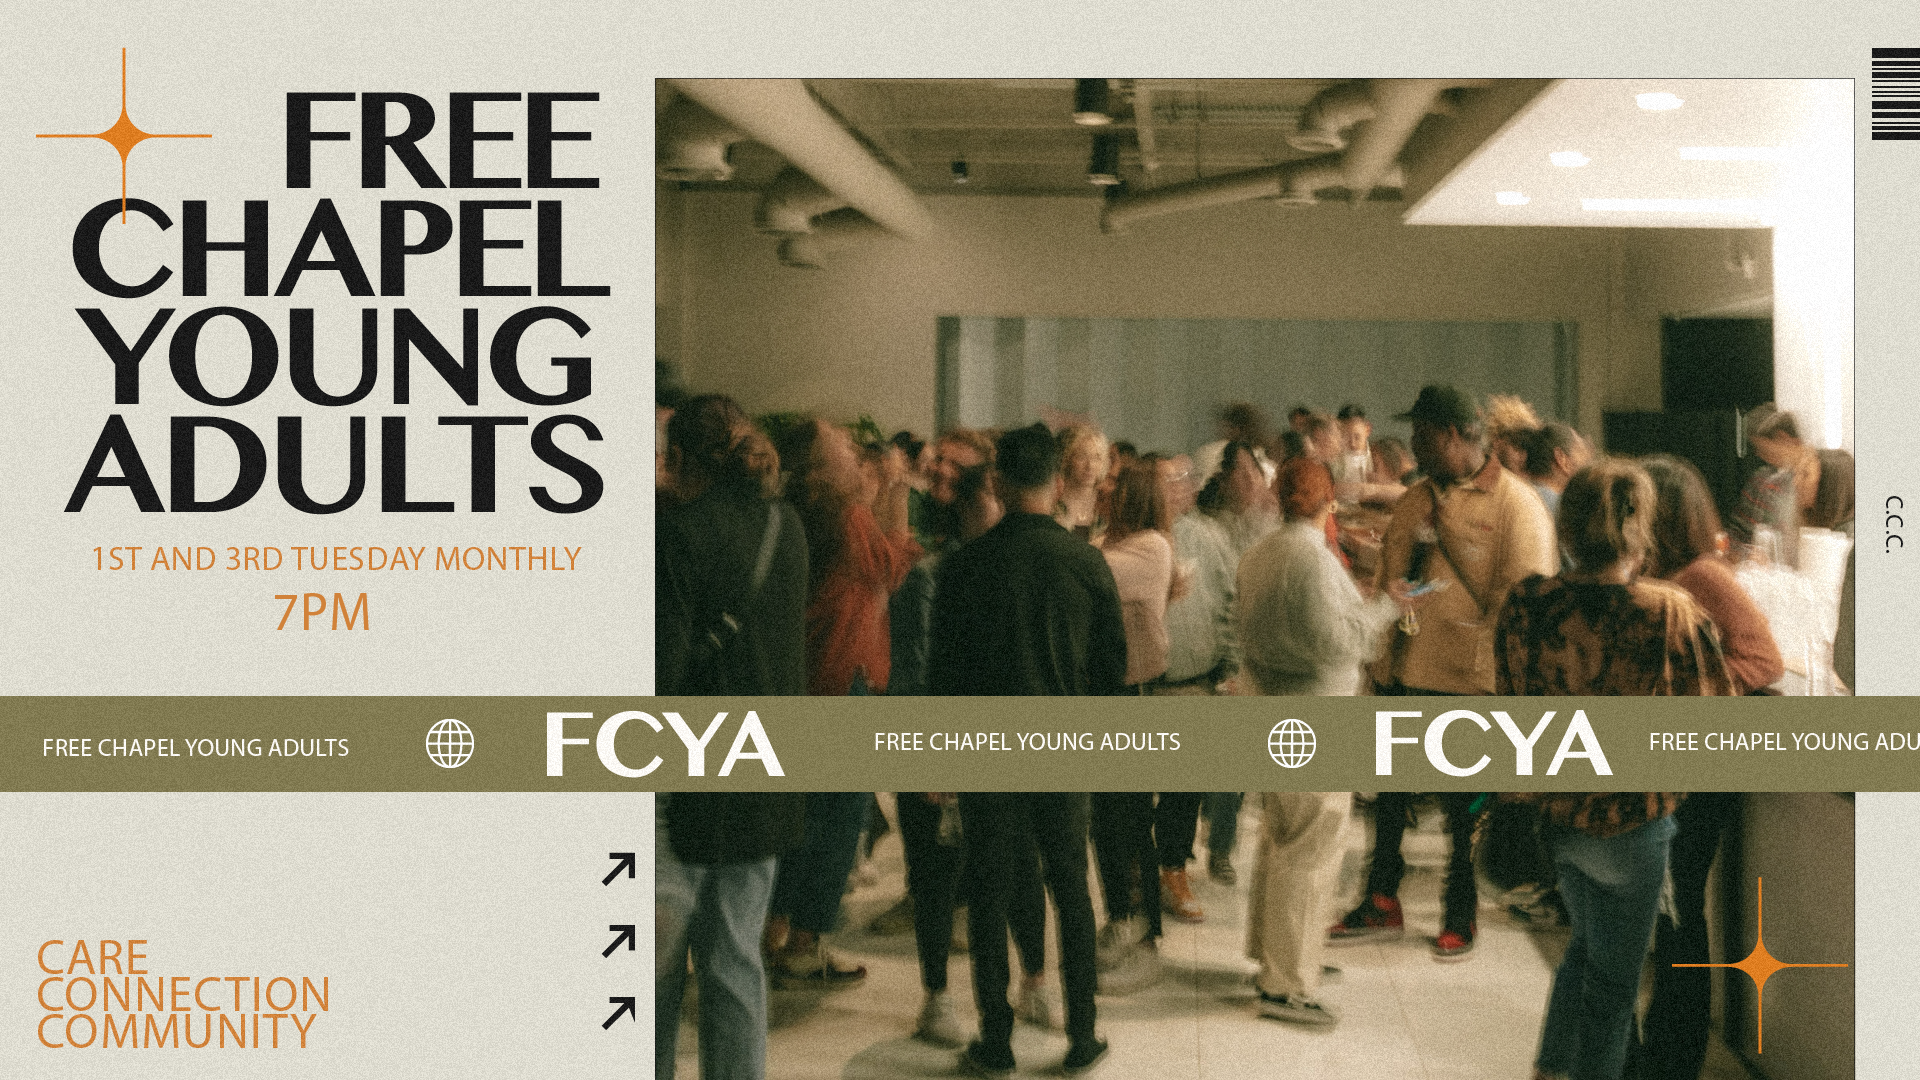 FCYA: First and Third Tuesday at the Gainesville campus